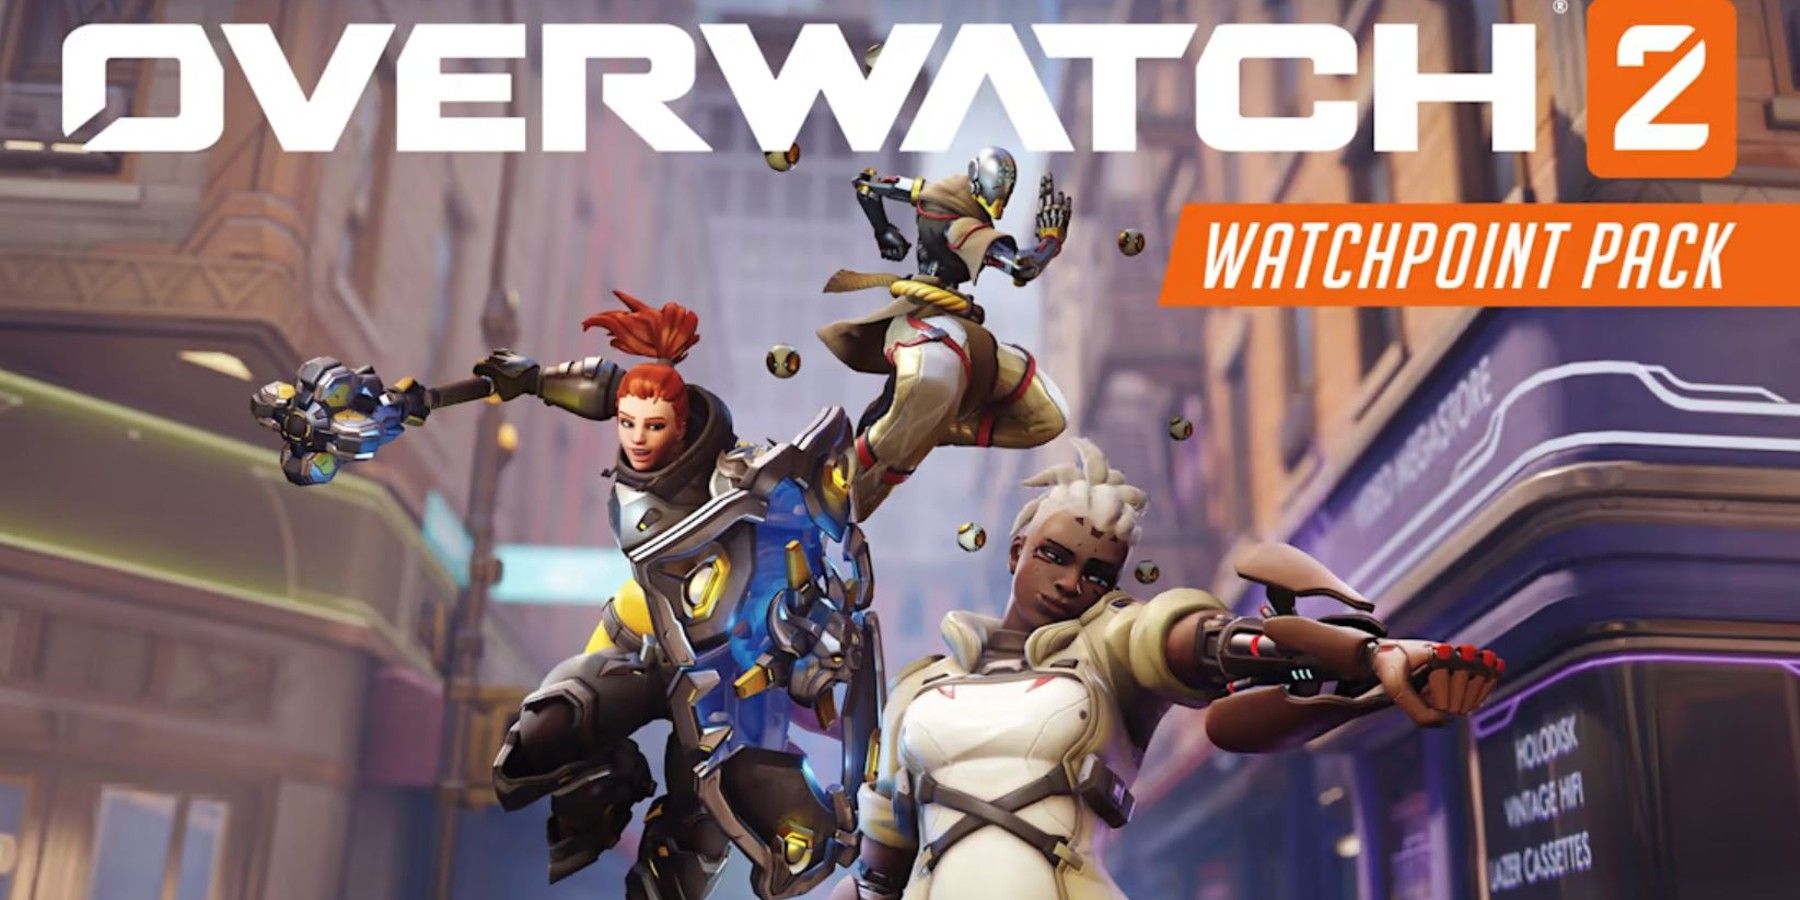 Watchpoint Pack Comes with a Highly Ironic Inclusion